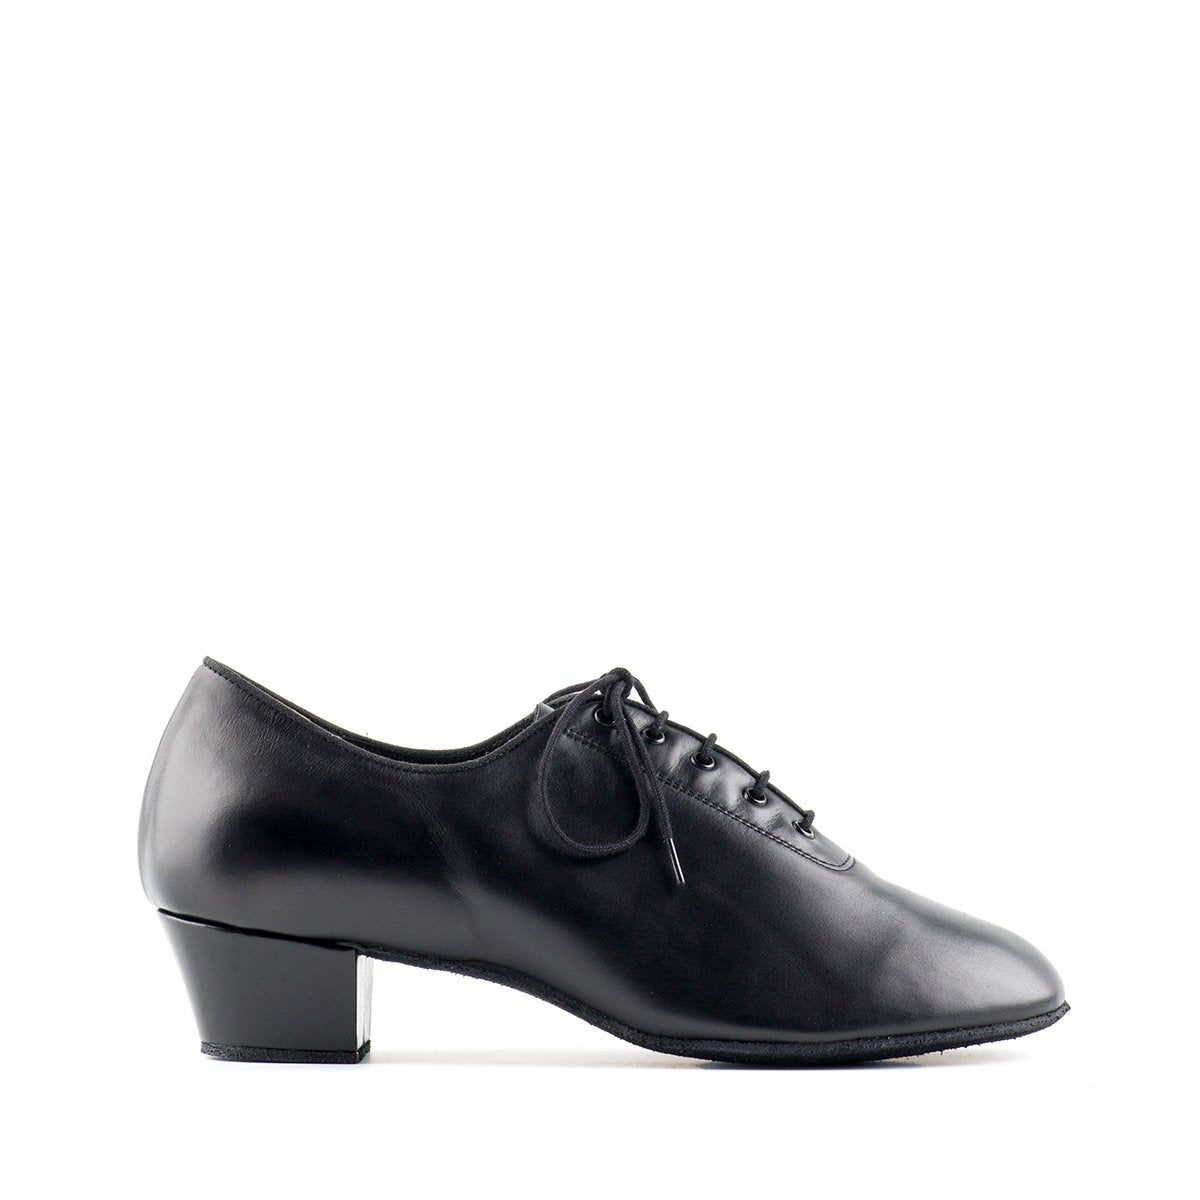 Soft and Flexible Black Leather Practice Dance Shoe with Cuban Heel